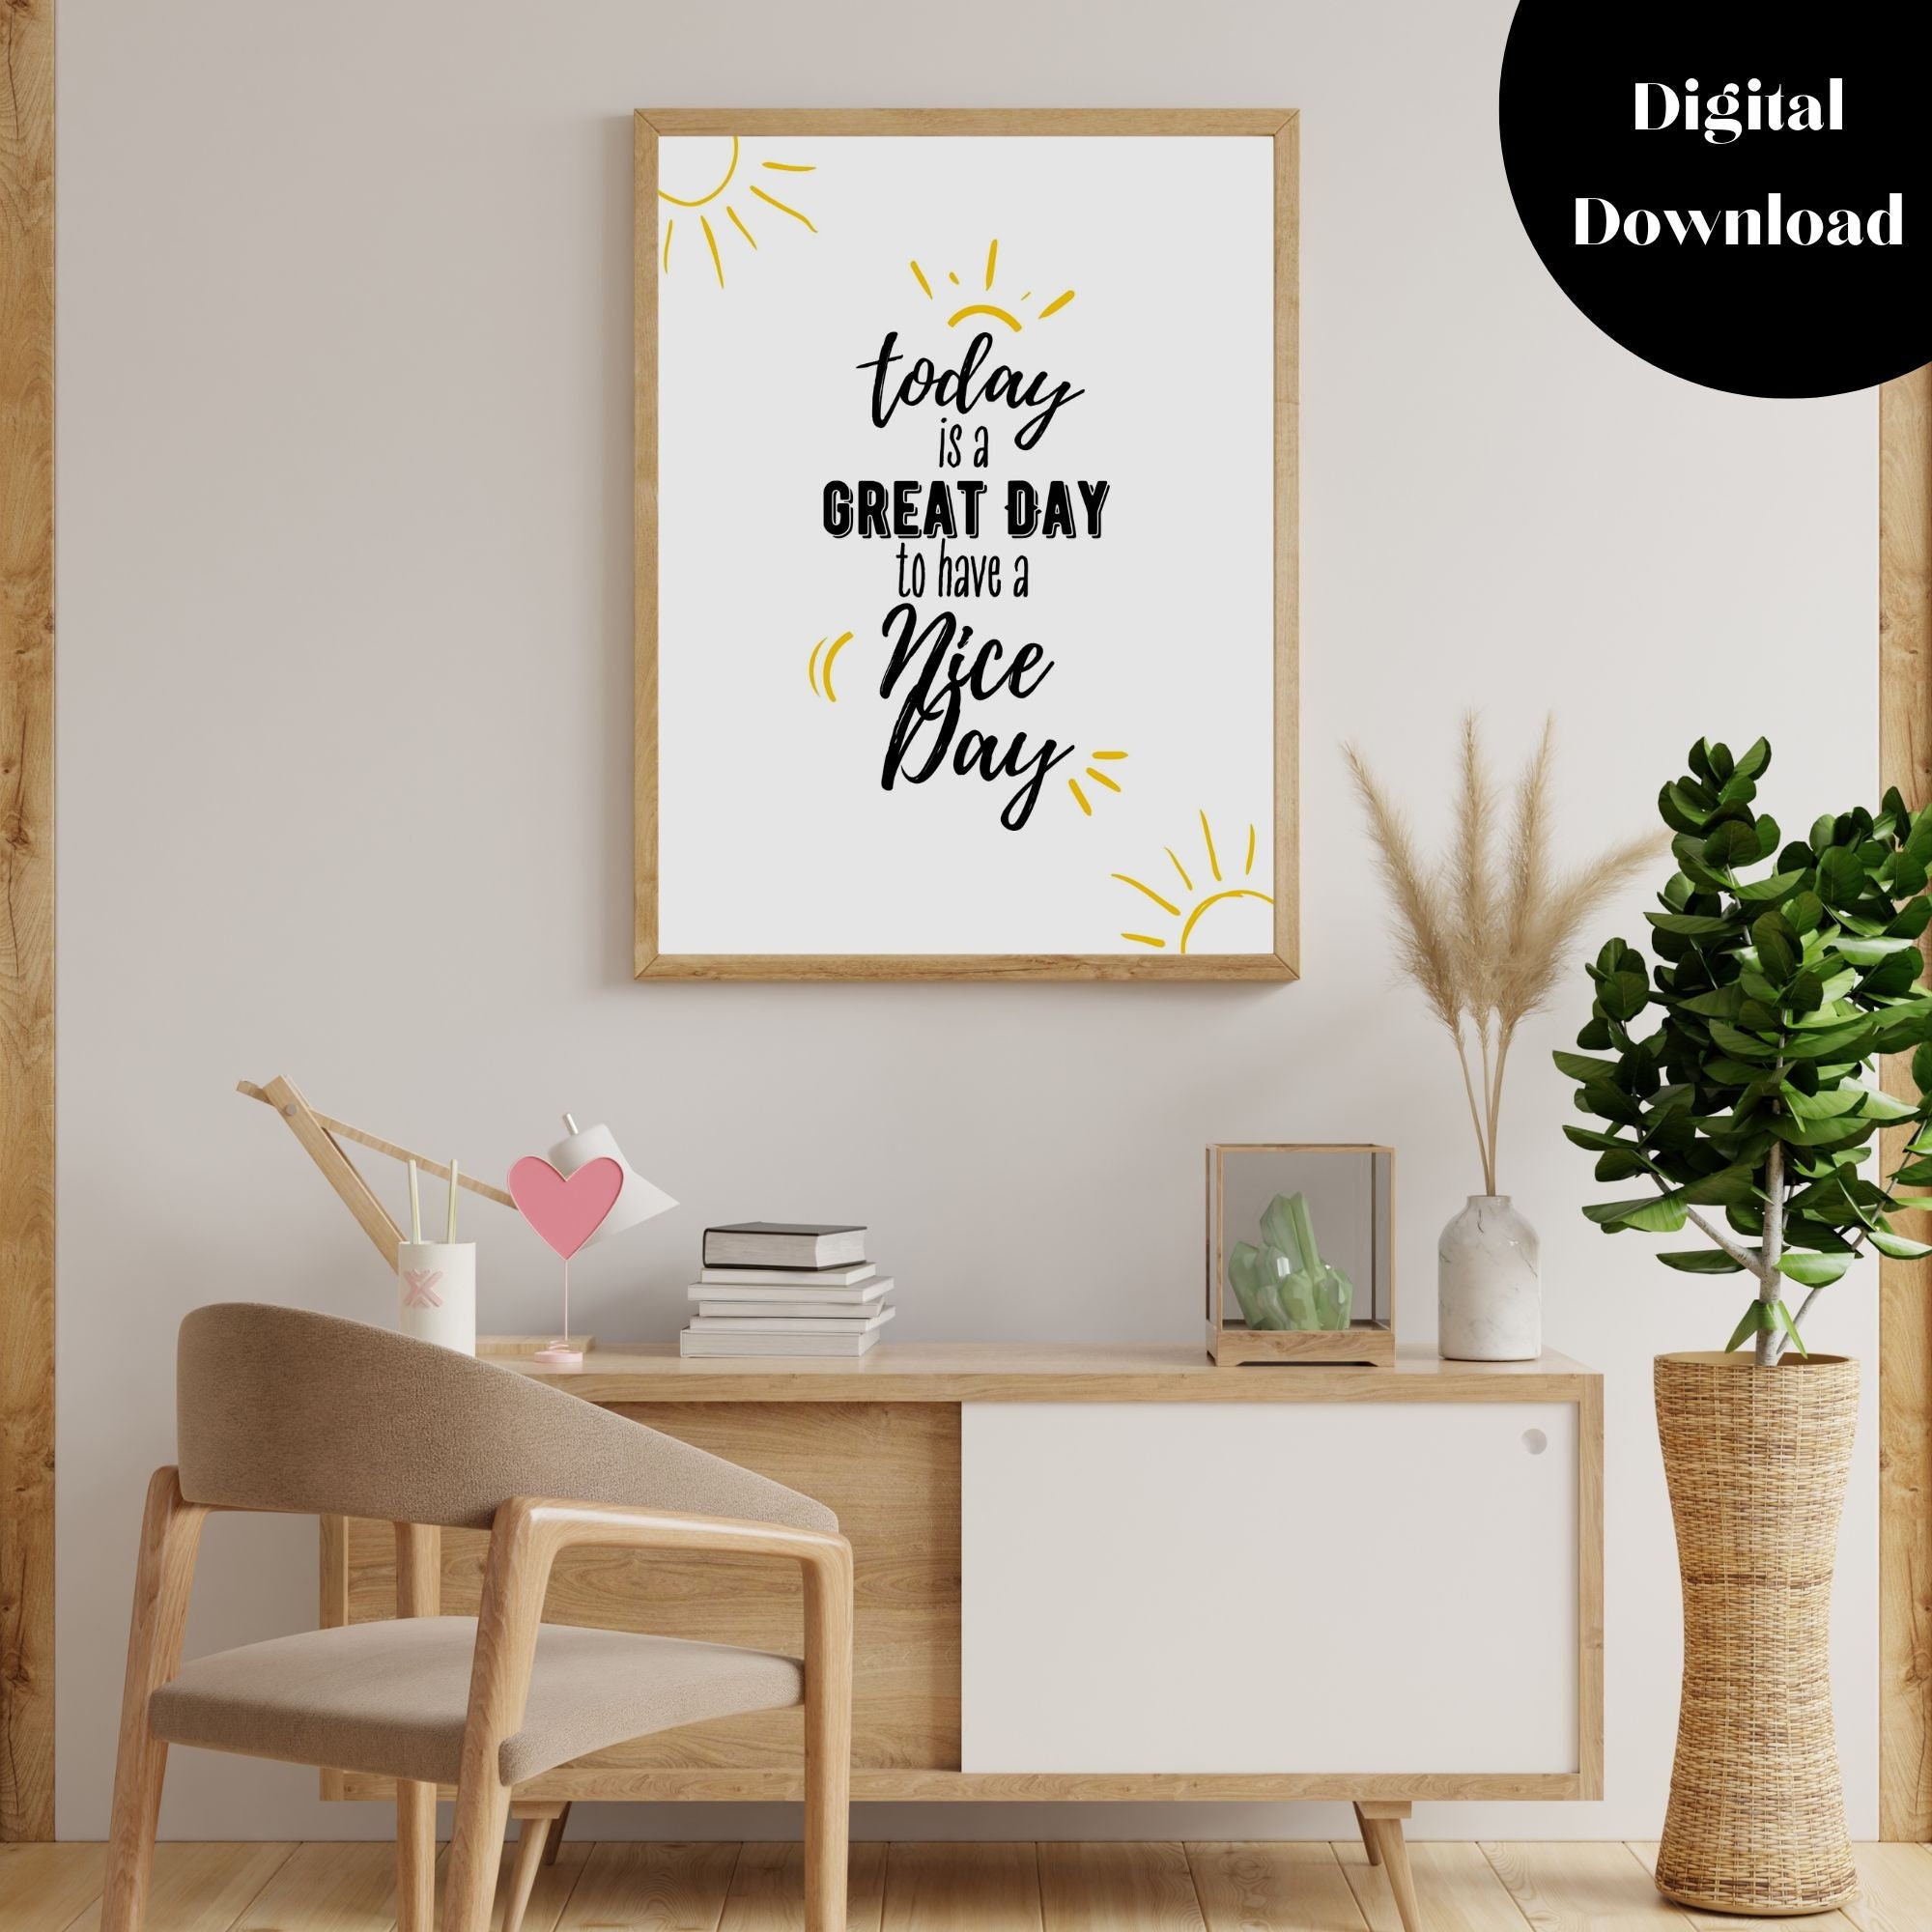 Have Nice Day Printable Wall Art Digital Download Positive Etsy